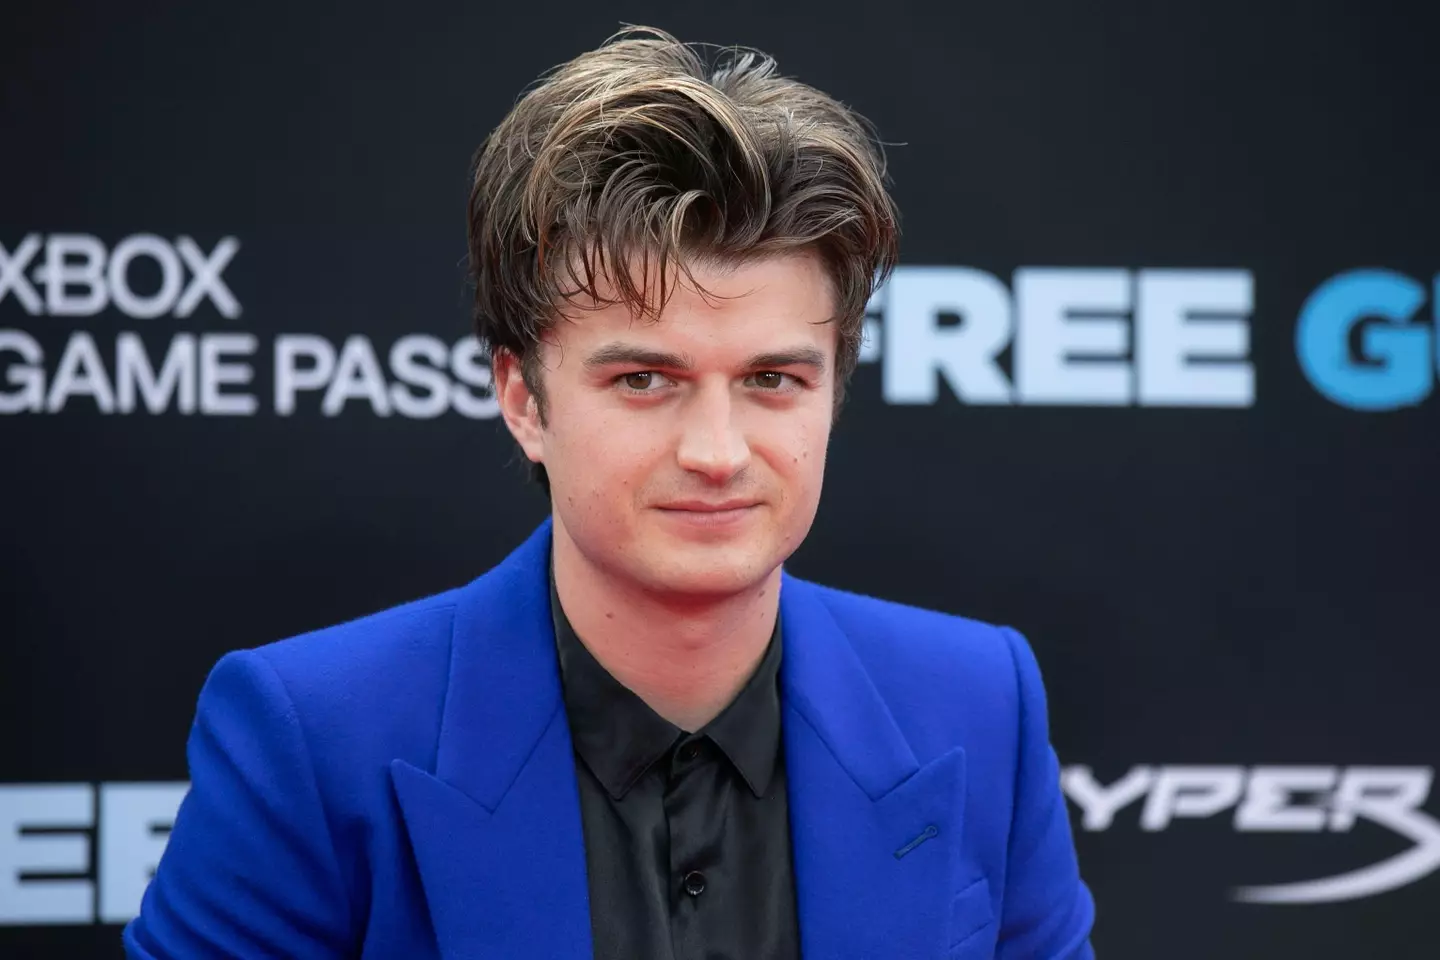 Joe Keery at the premiere for the film Free Guy.